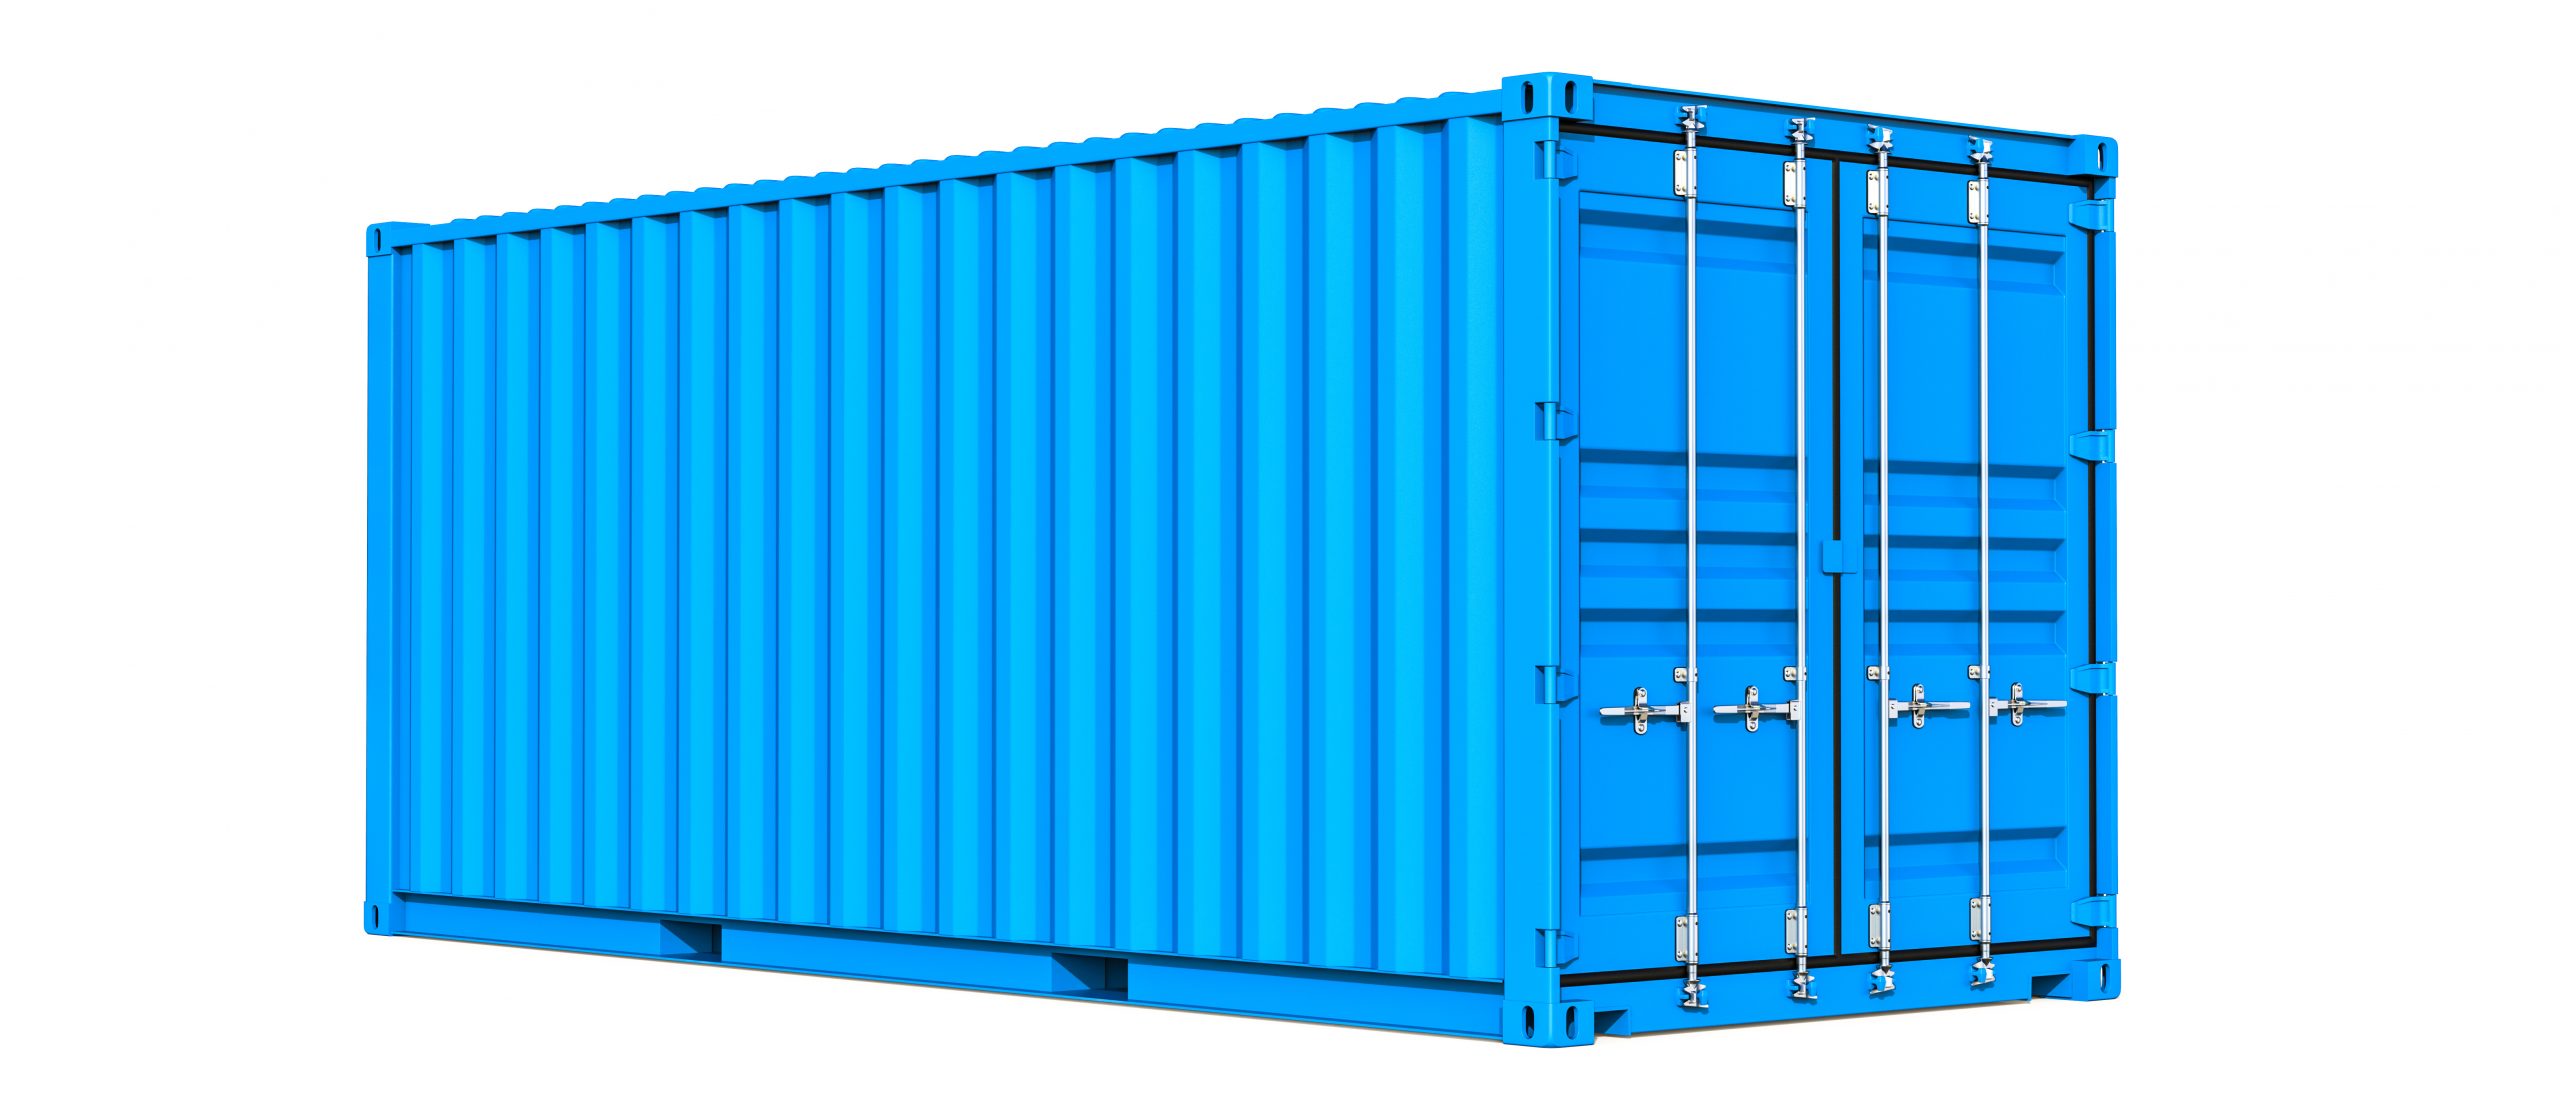 https://www.evansdist.com/wp-content/uploads/2023/02/Dry-Storage-Container-scaled.jpeg